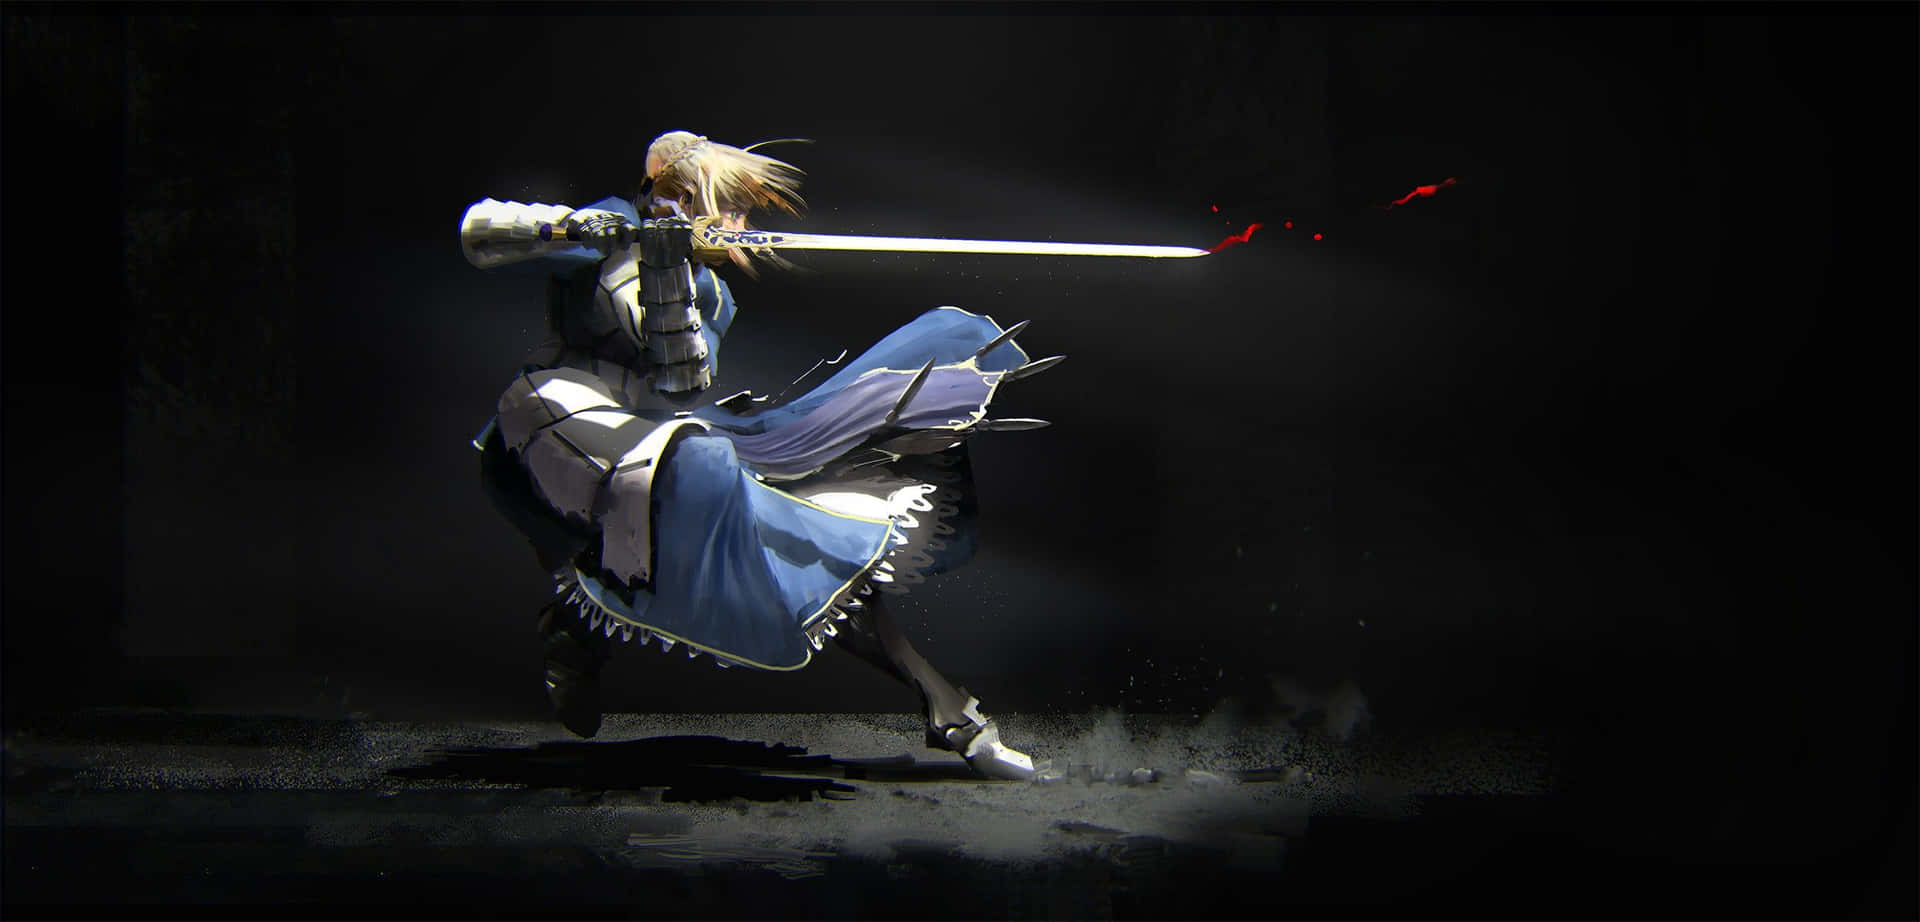 Saber Fate Stay Night Bloodied Sword Wallpaper